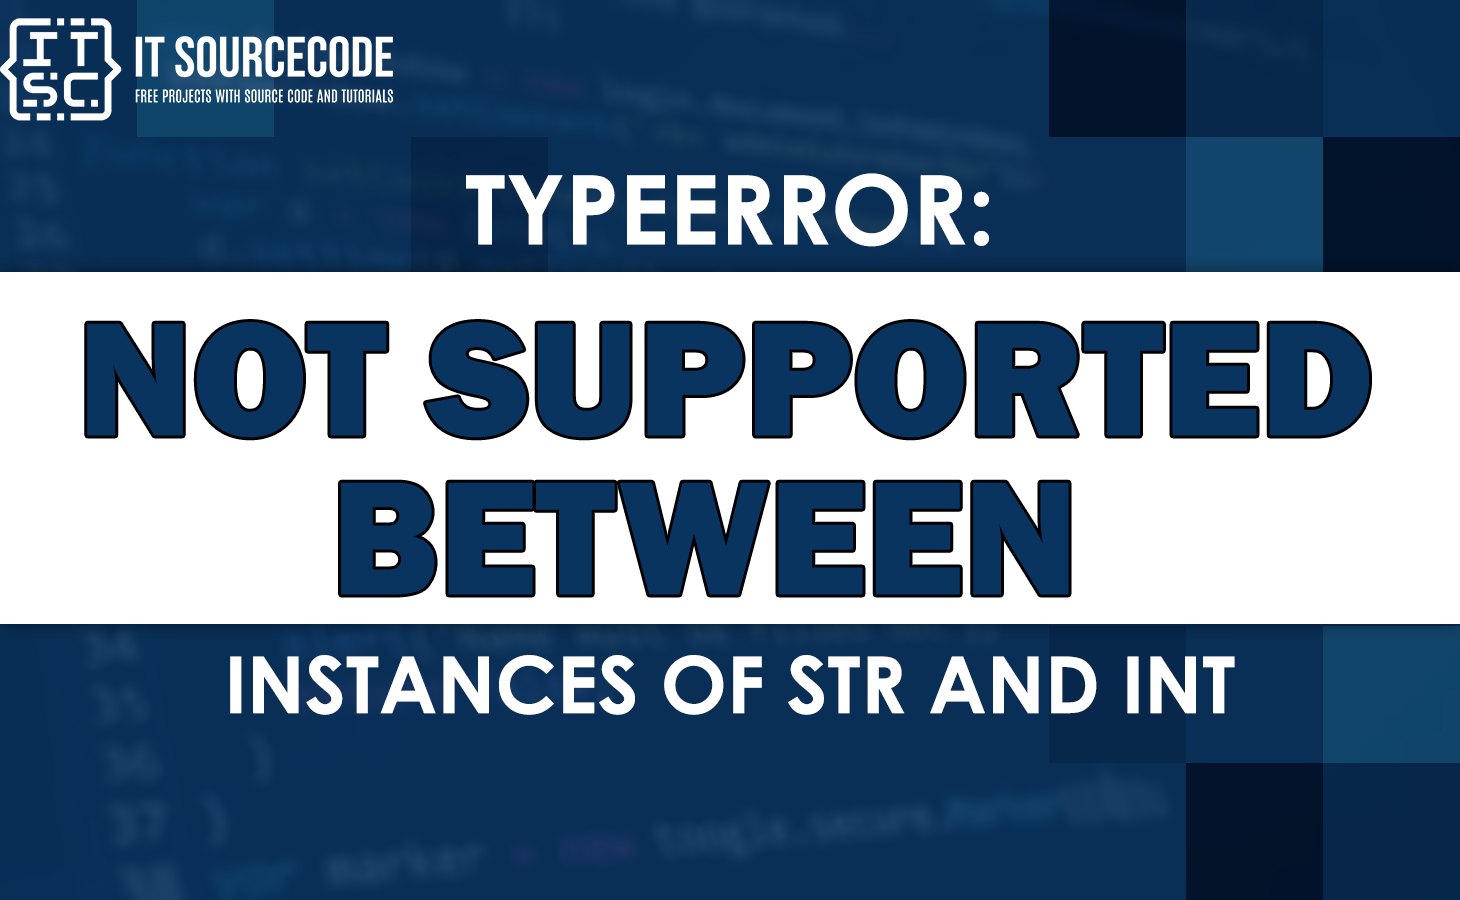 <' Not supported between instances of 'Str' and 'INT'. TYPEERROR unsupported operand Type s for INT and Str перевод. Typeerror not supported between instances